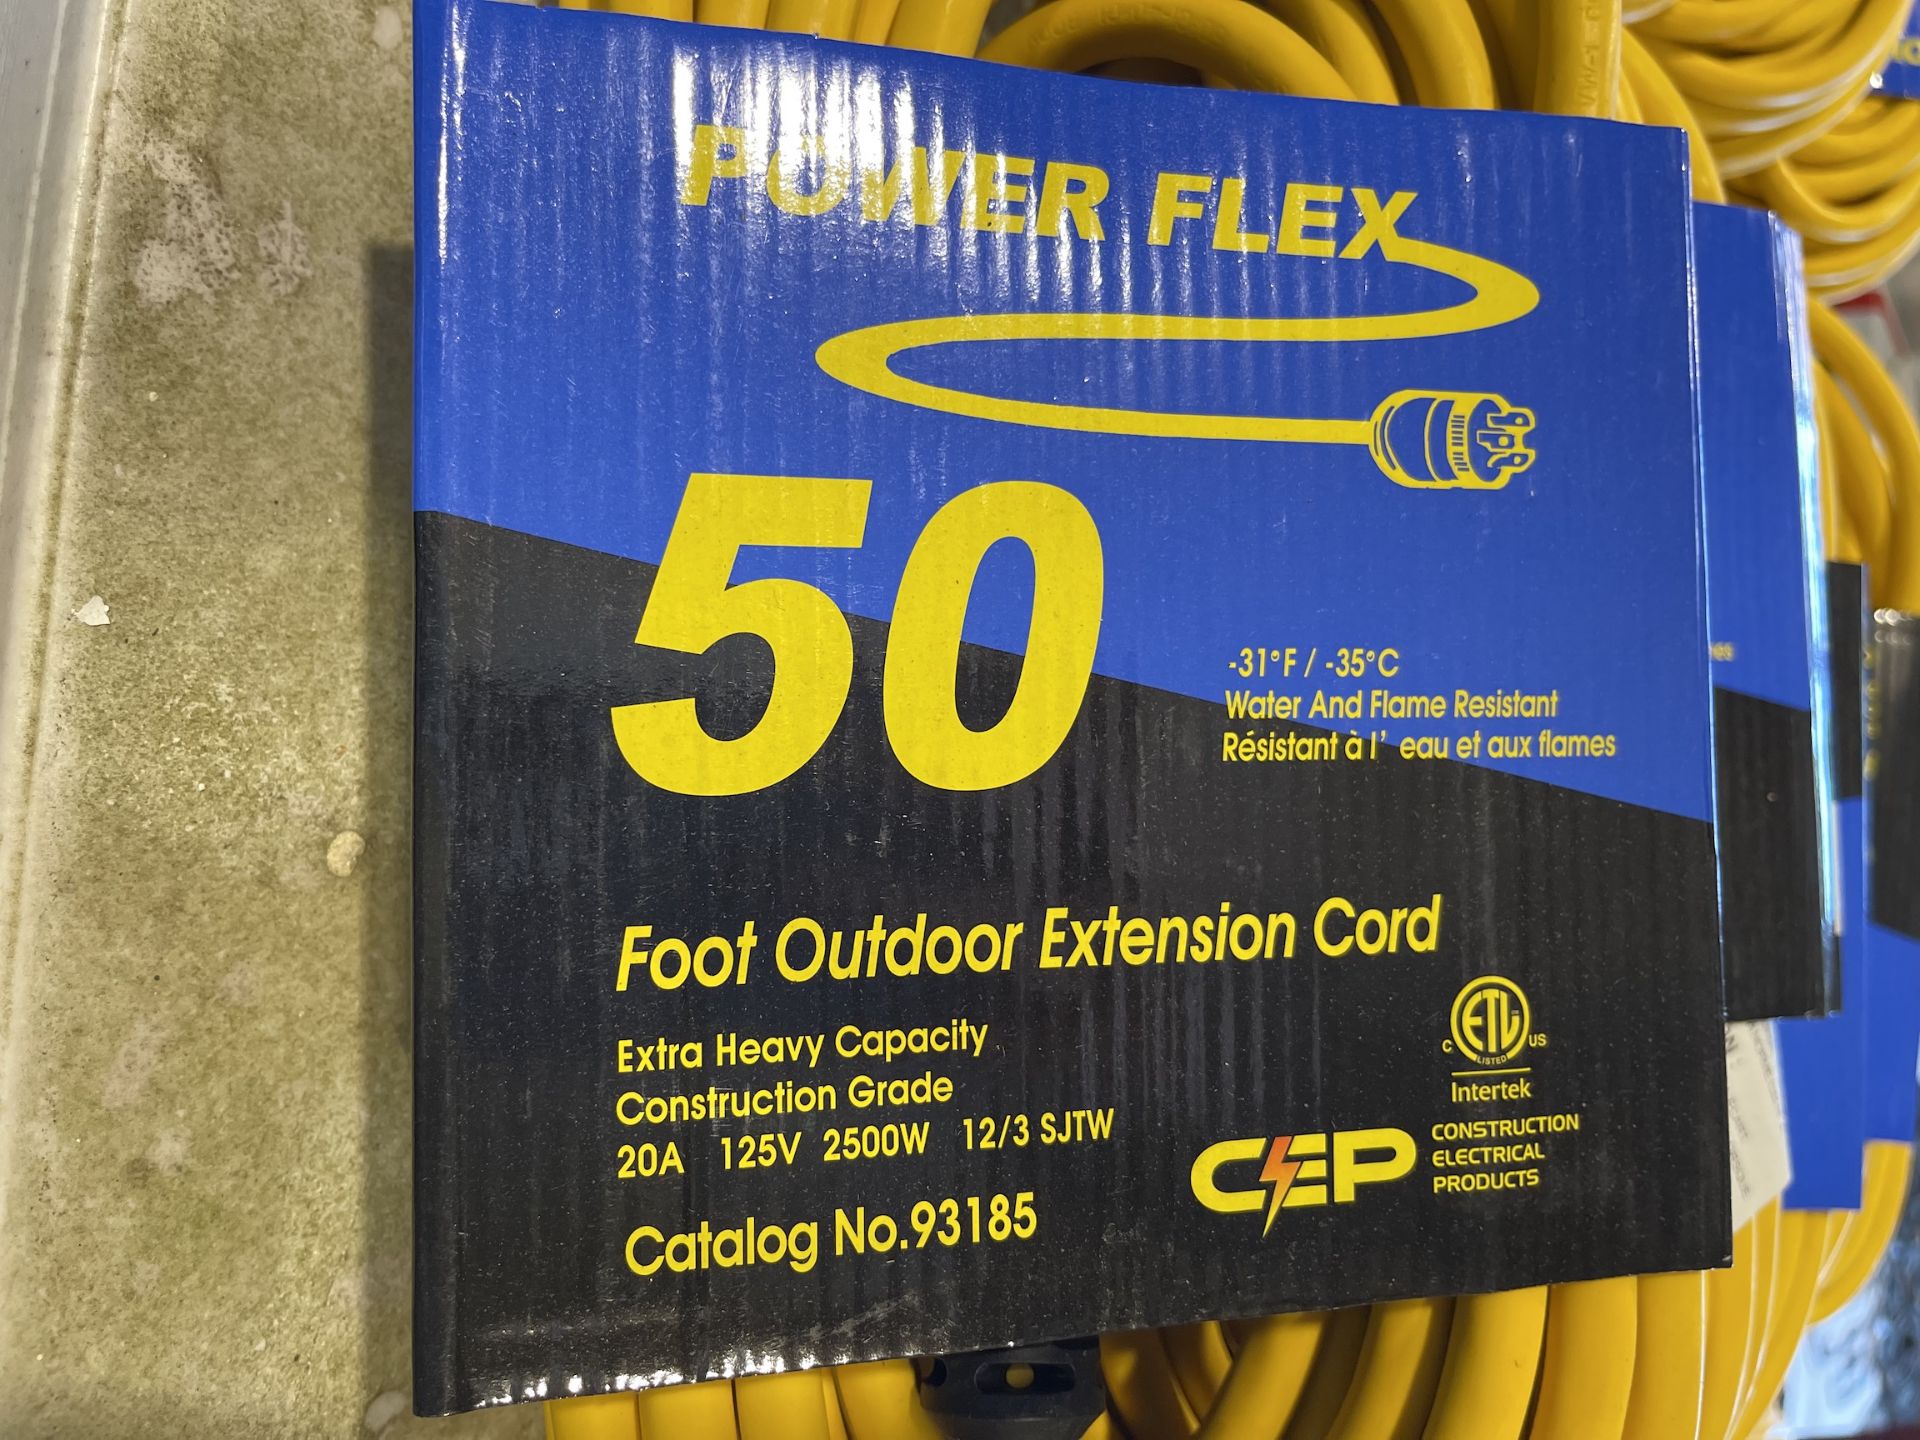 Lot of 6 50ft Outdoor Extension Cords - Upland - Image 3 of 4